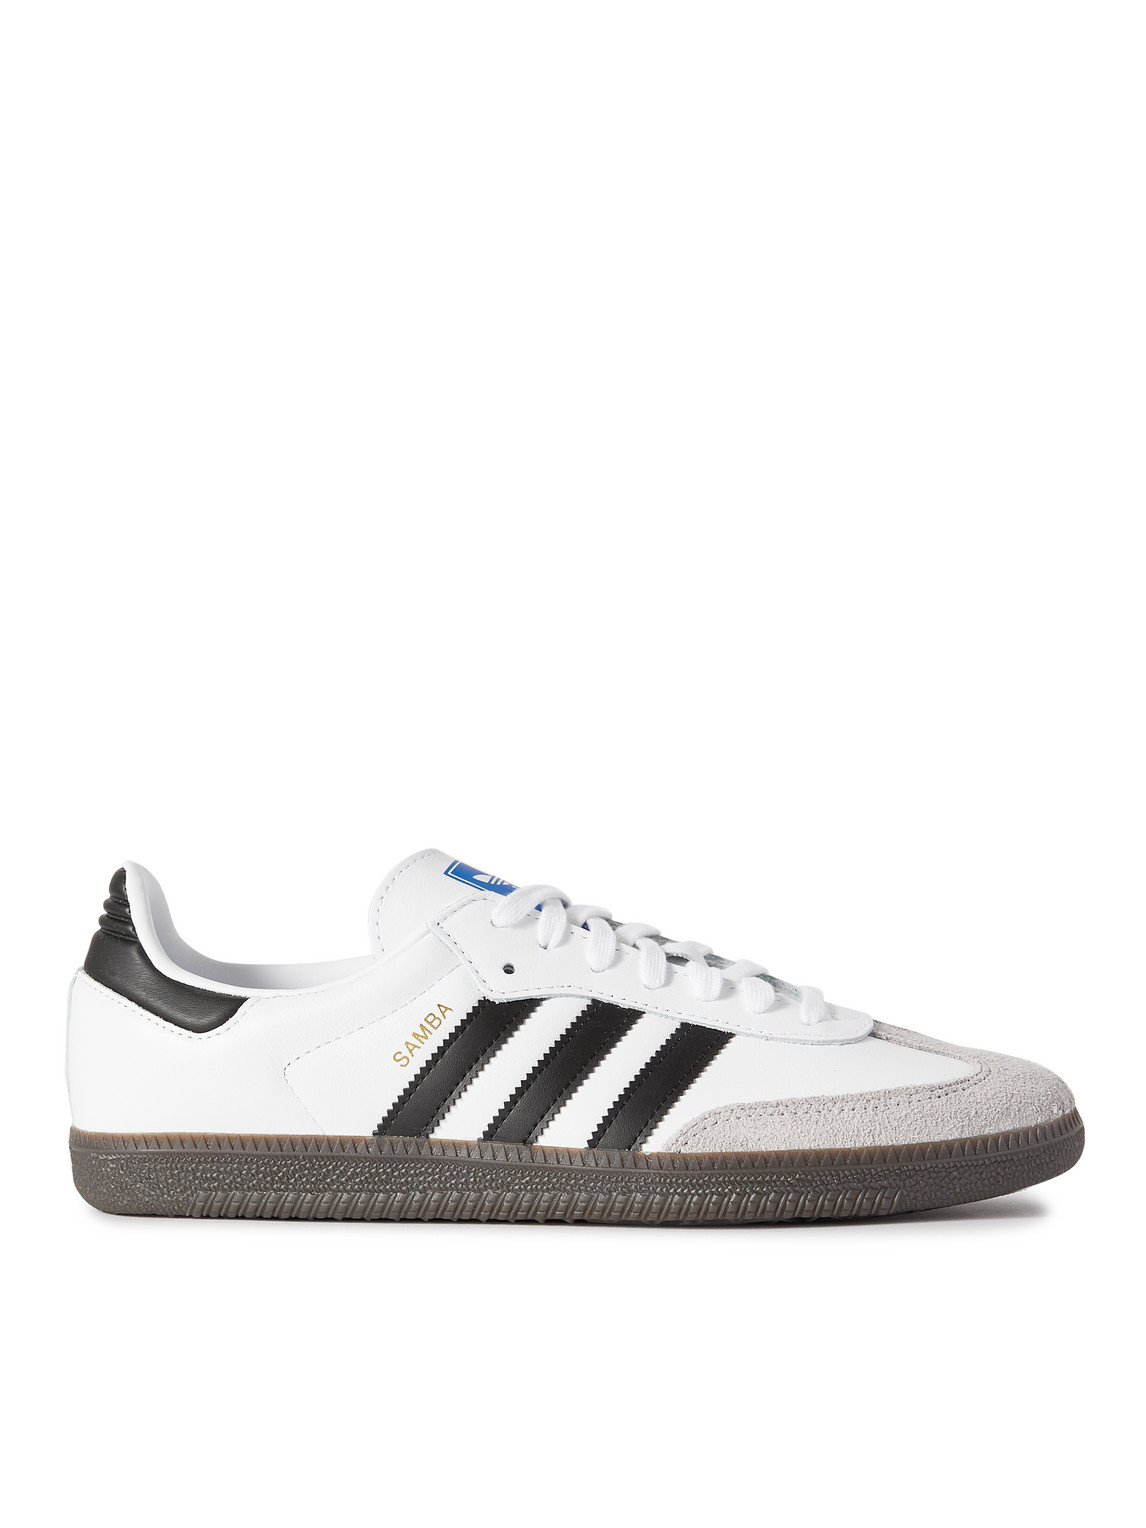 Adidas Originals Samba Suede-trimmed Leather Sneakers In White